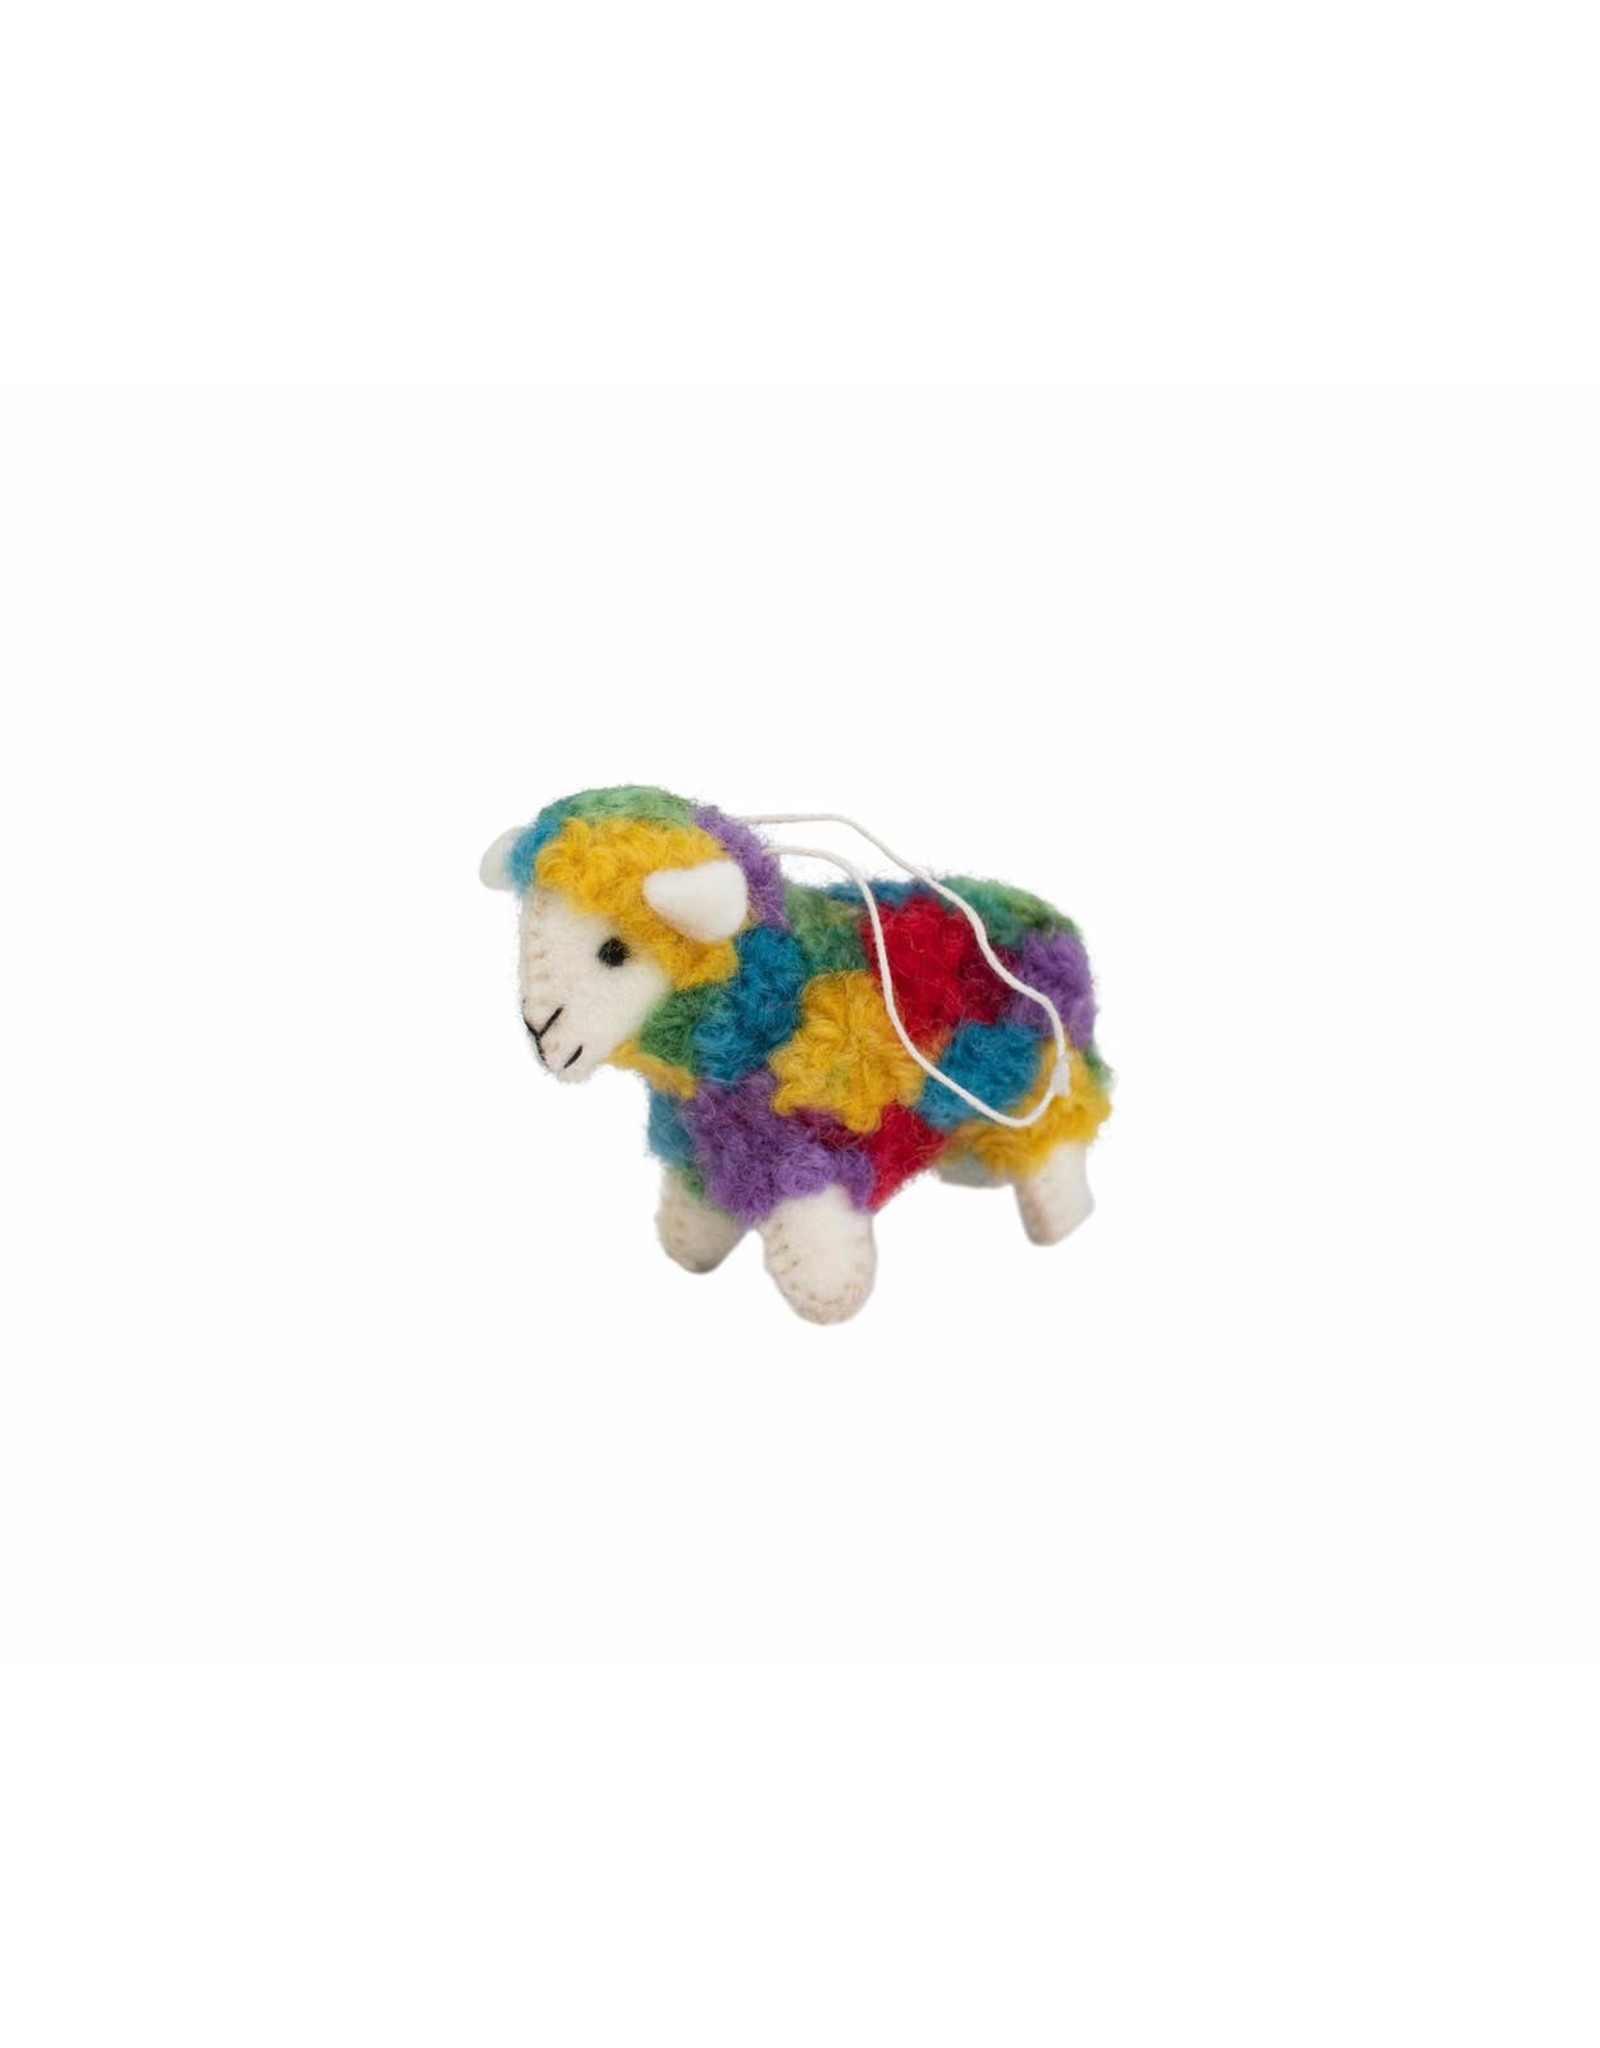 Trade roots Colorful Sheep Ornament, Nepal